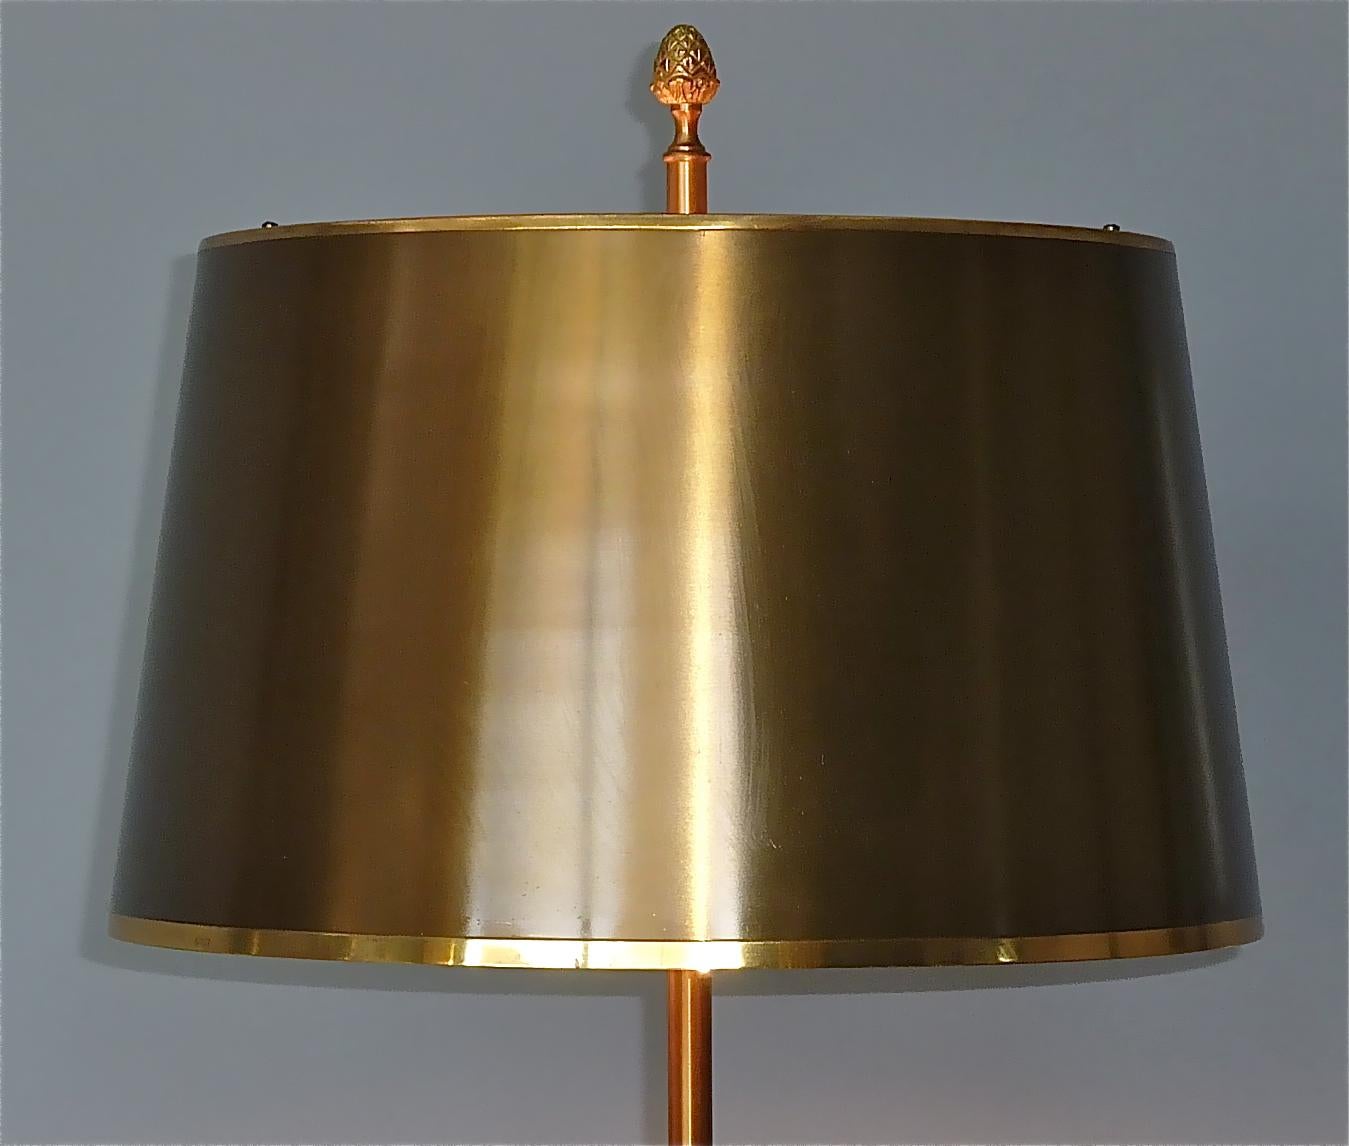 Rare Signed Gilt Bronze French Table Lamp Maison Charles Pomgranate 1970s Jansen For Sale 10